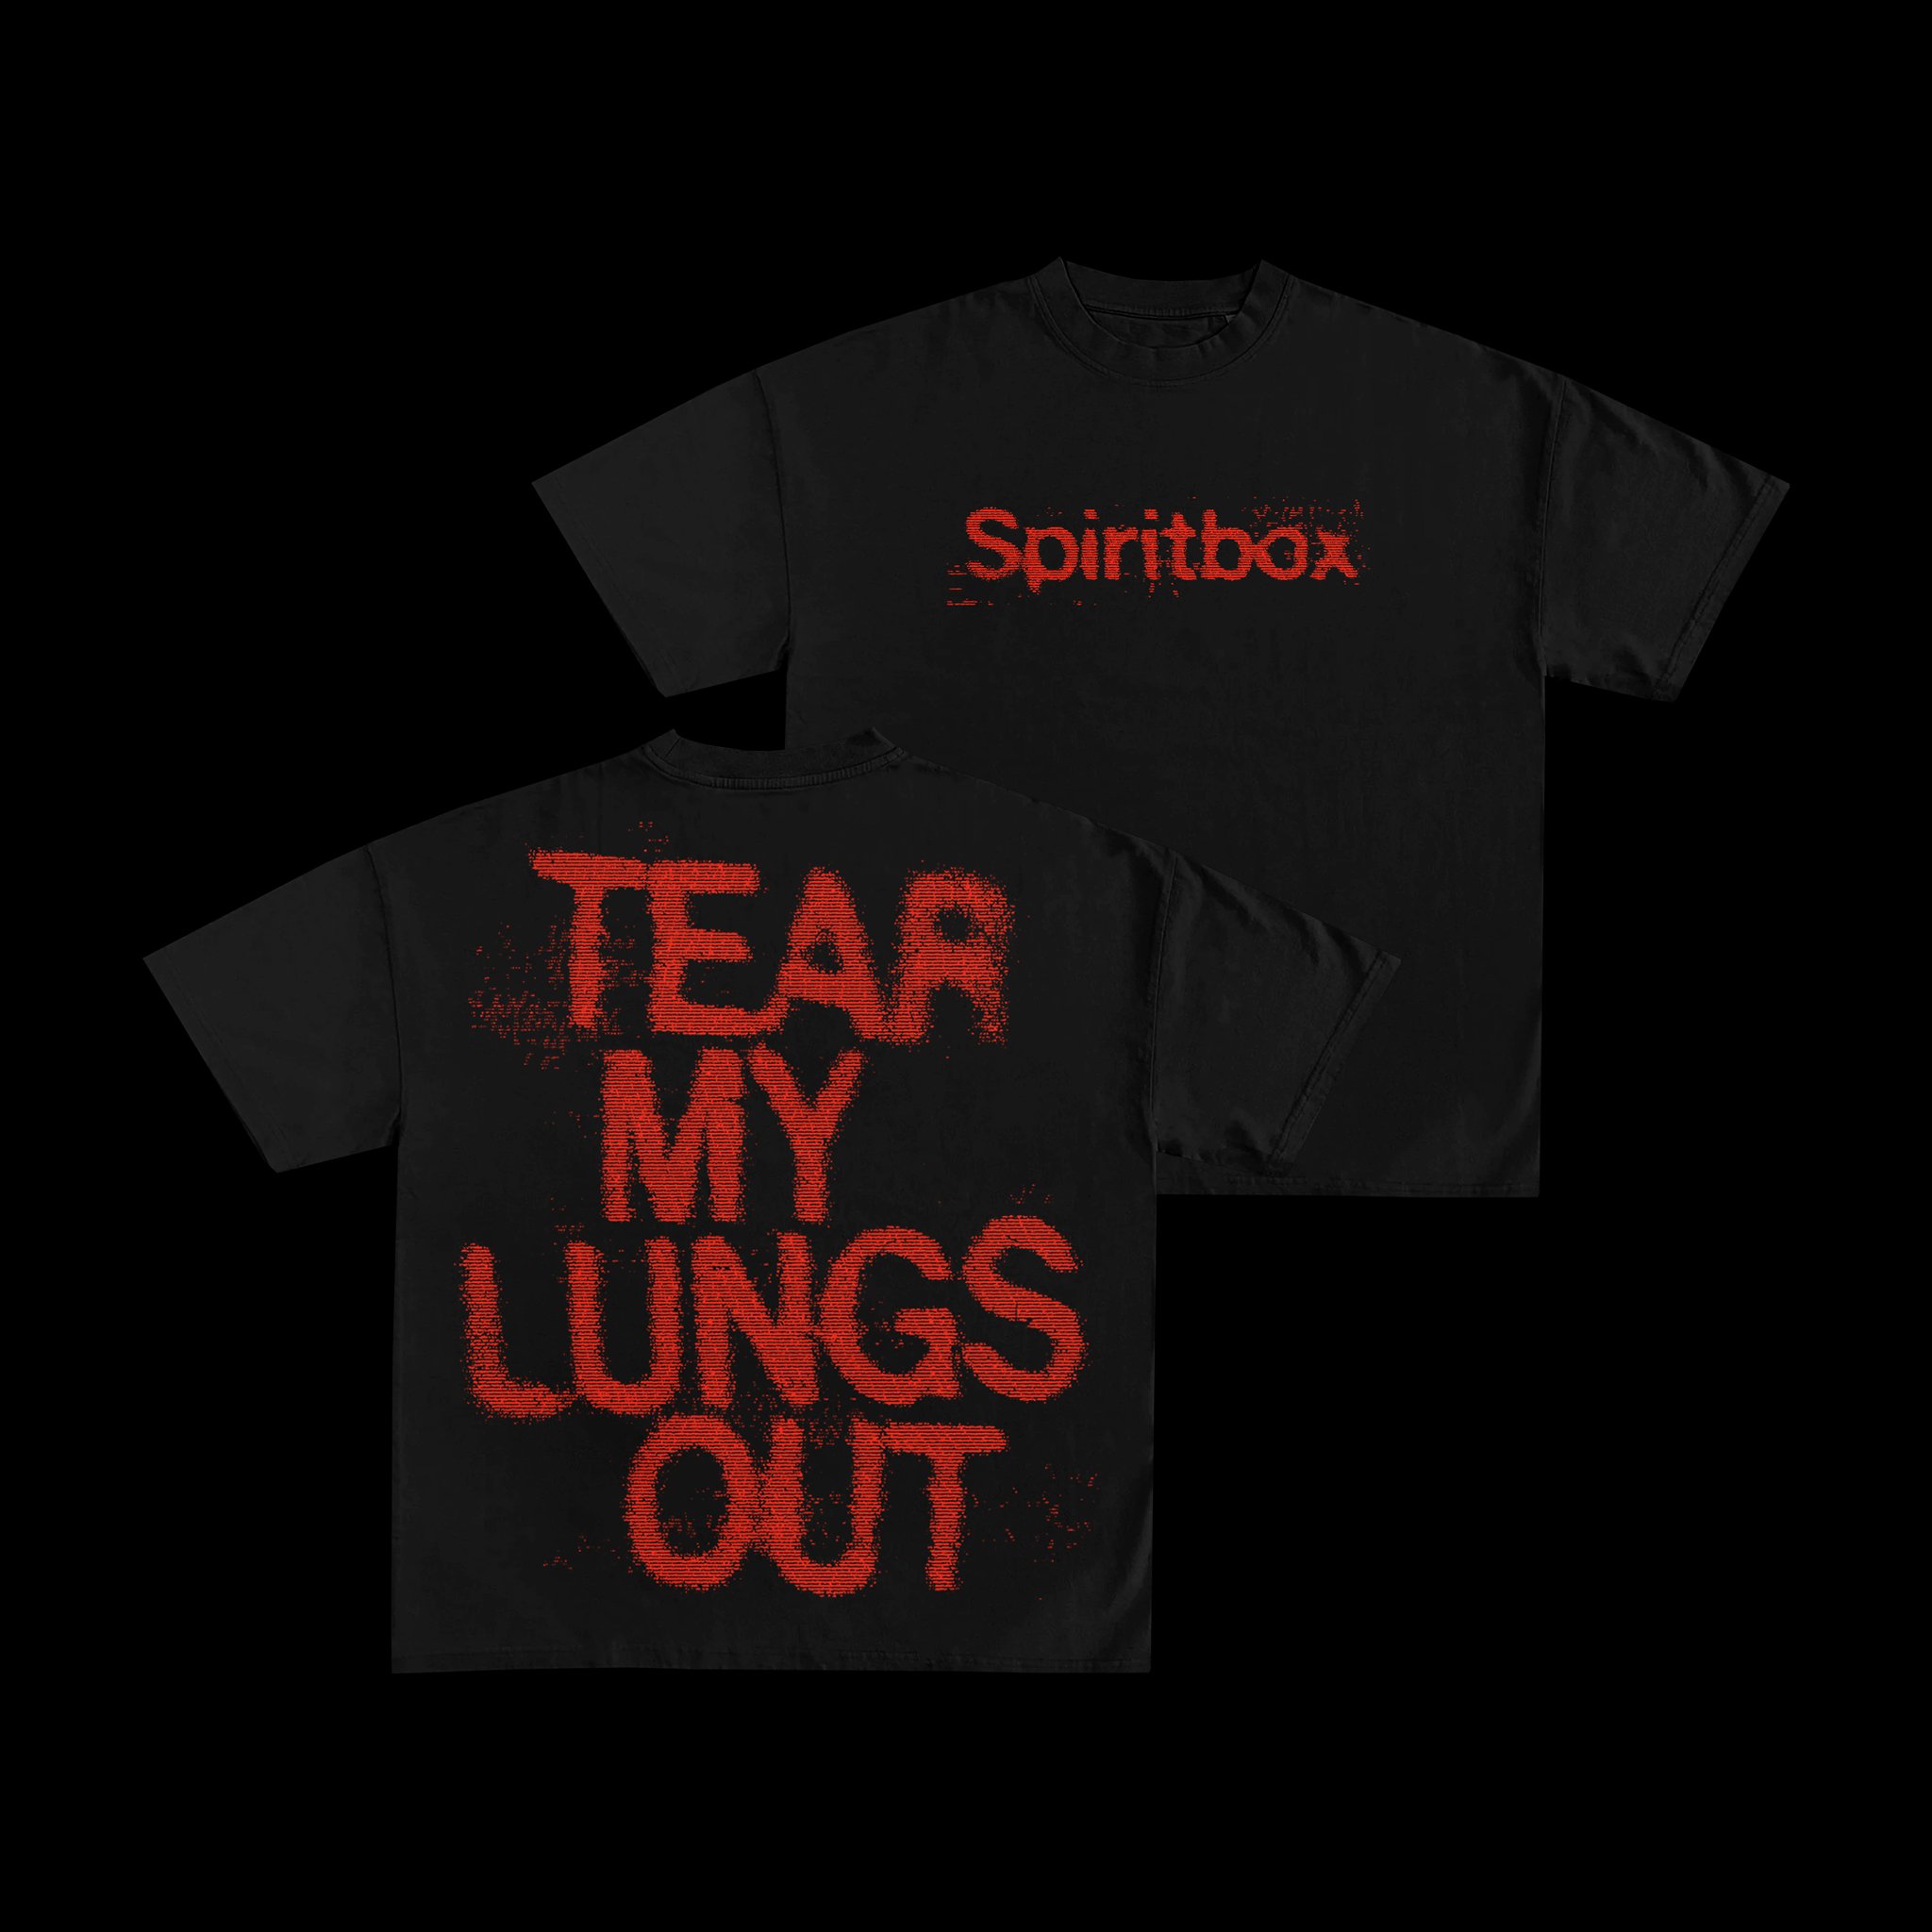 CELLAR DOOR / Spiritbox 

It's been a minute since I've shared a Spiritbox project, but that doesn't mean we haven't been busy! Excited to unveil one piece from the full collection of tour merch I designed, available now on their EU run with @archite